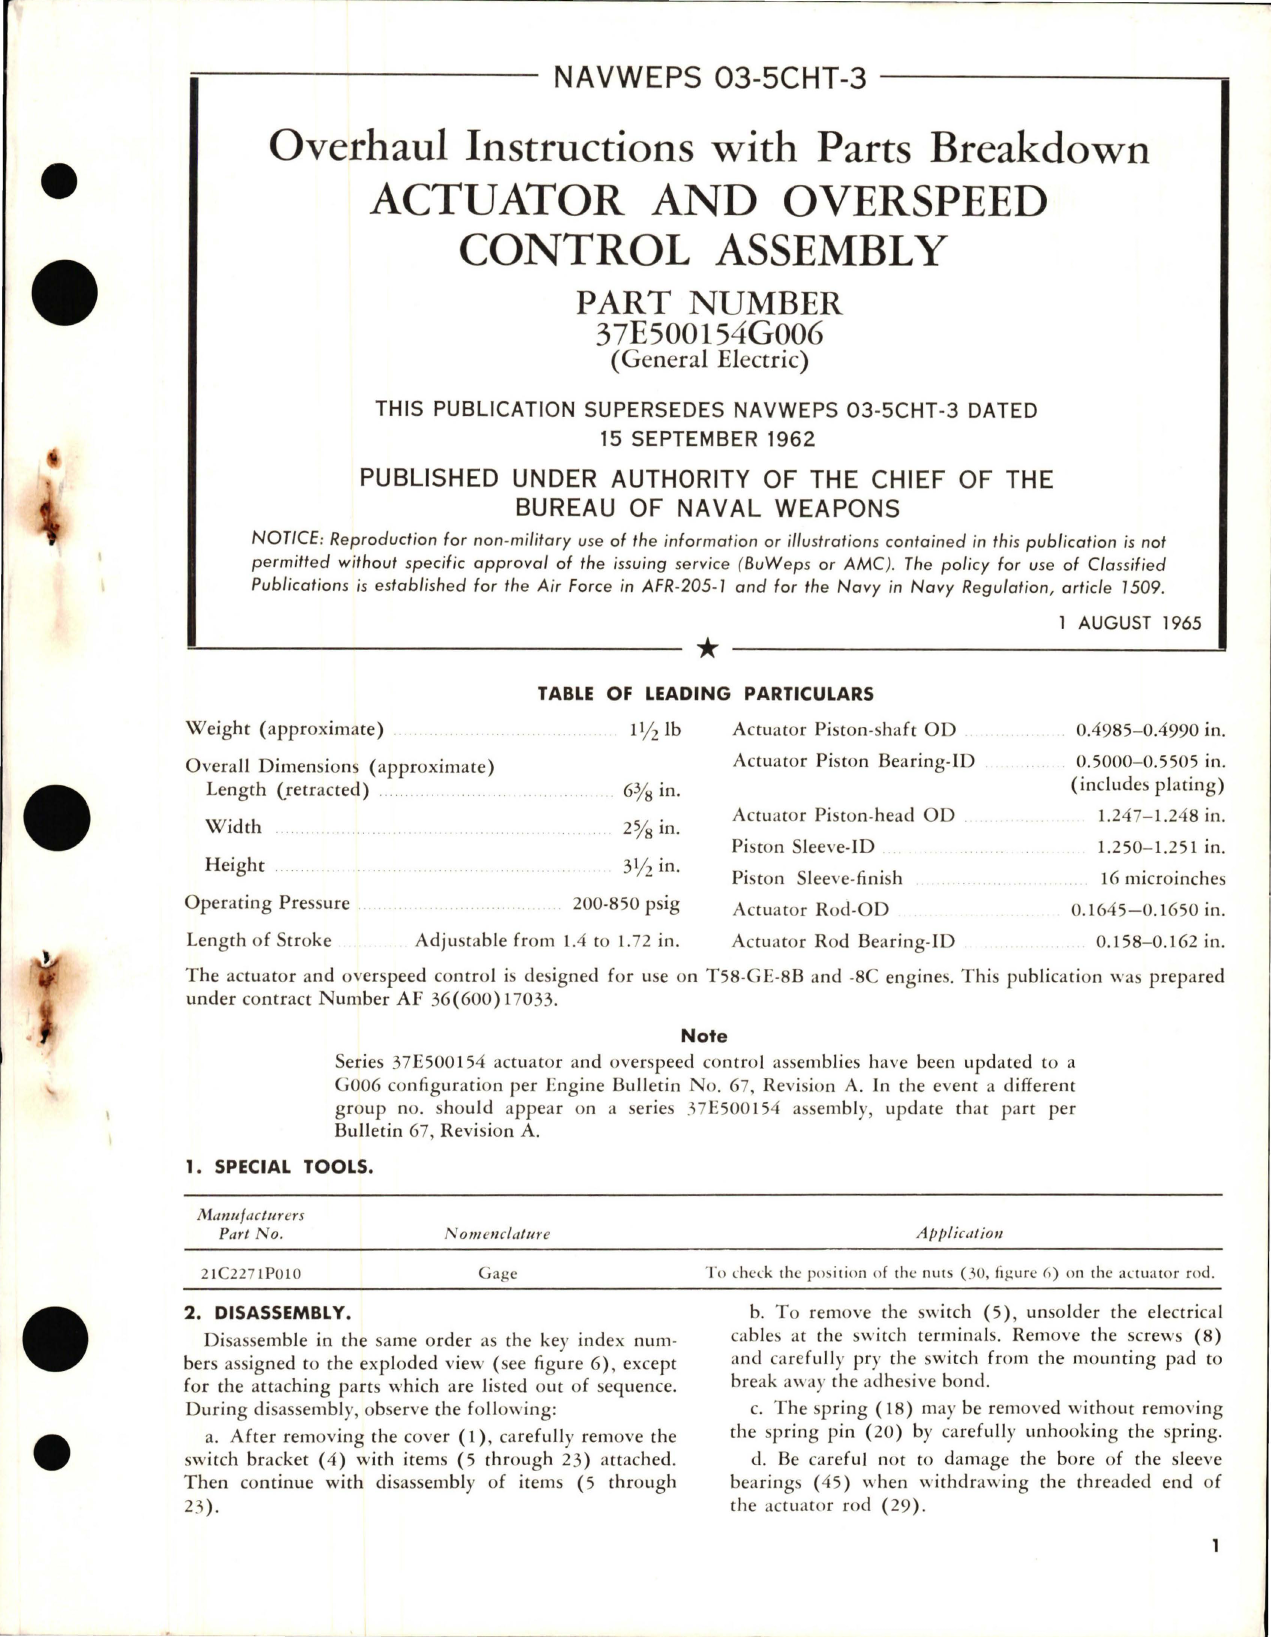 Sample page 1 from AirCorps Library document: Overhaul Instructions with Parts Breakdown for Actuator and Overspeed Control Assembly Part 37E500154G006